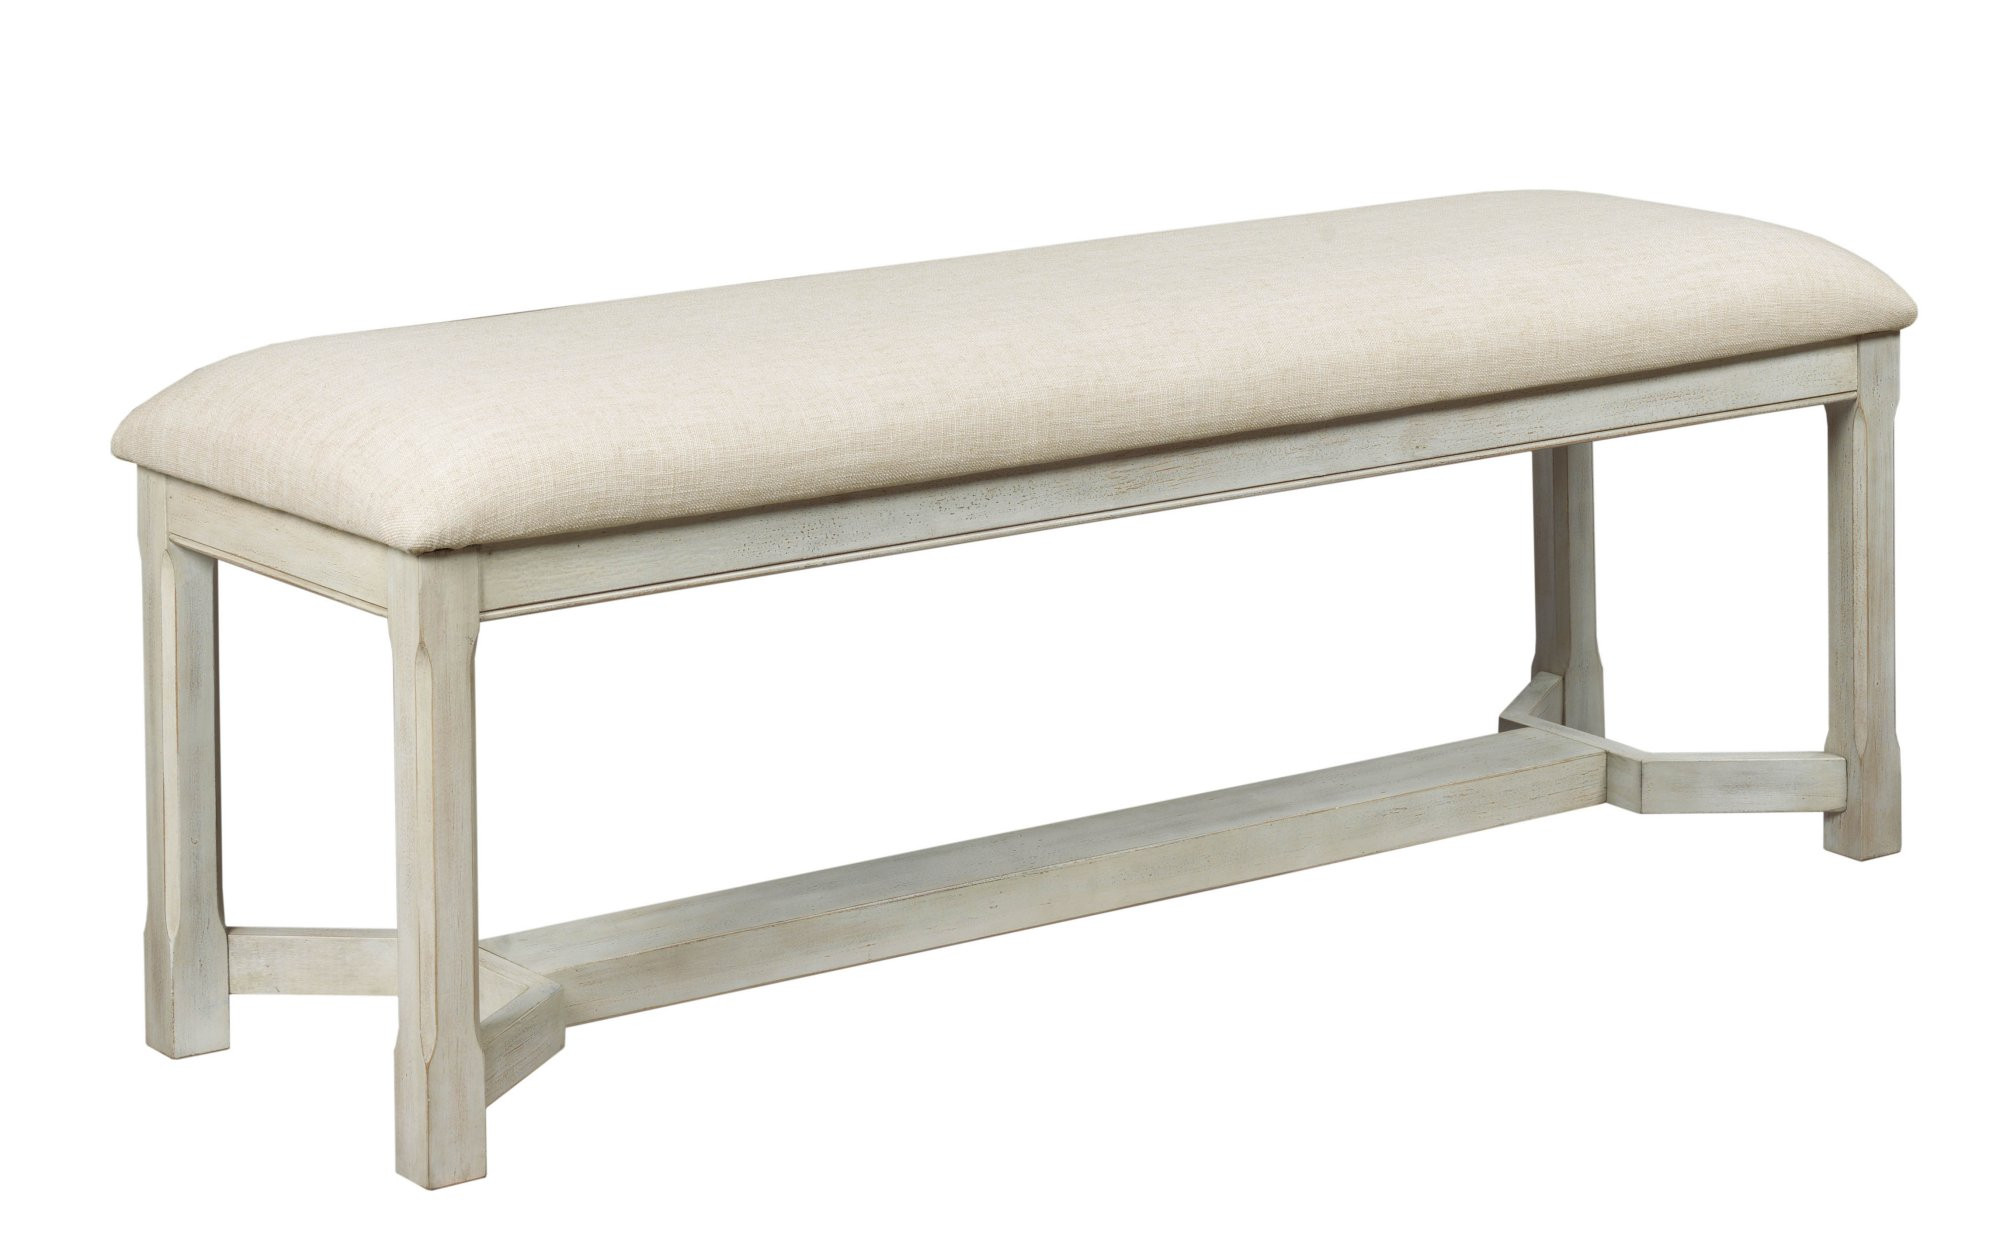 Clayton Upholstered Bed Bench